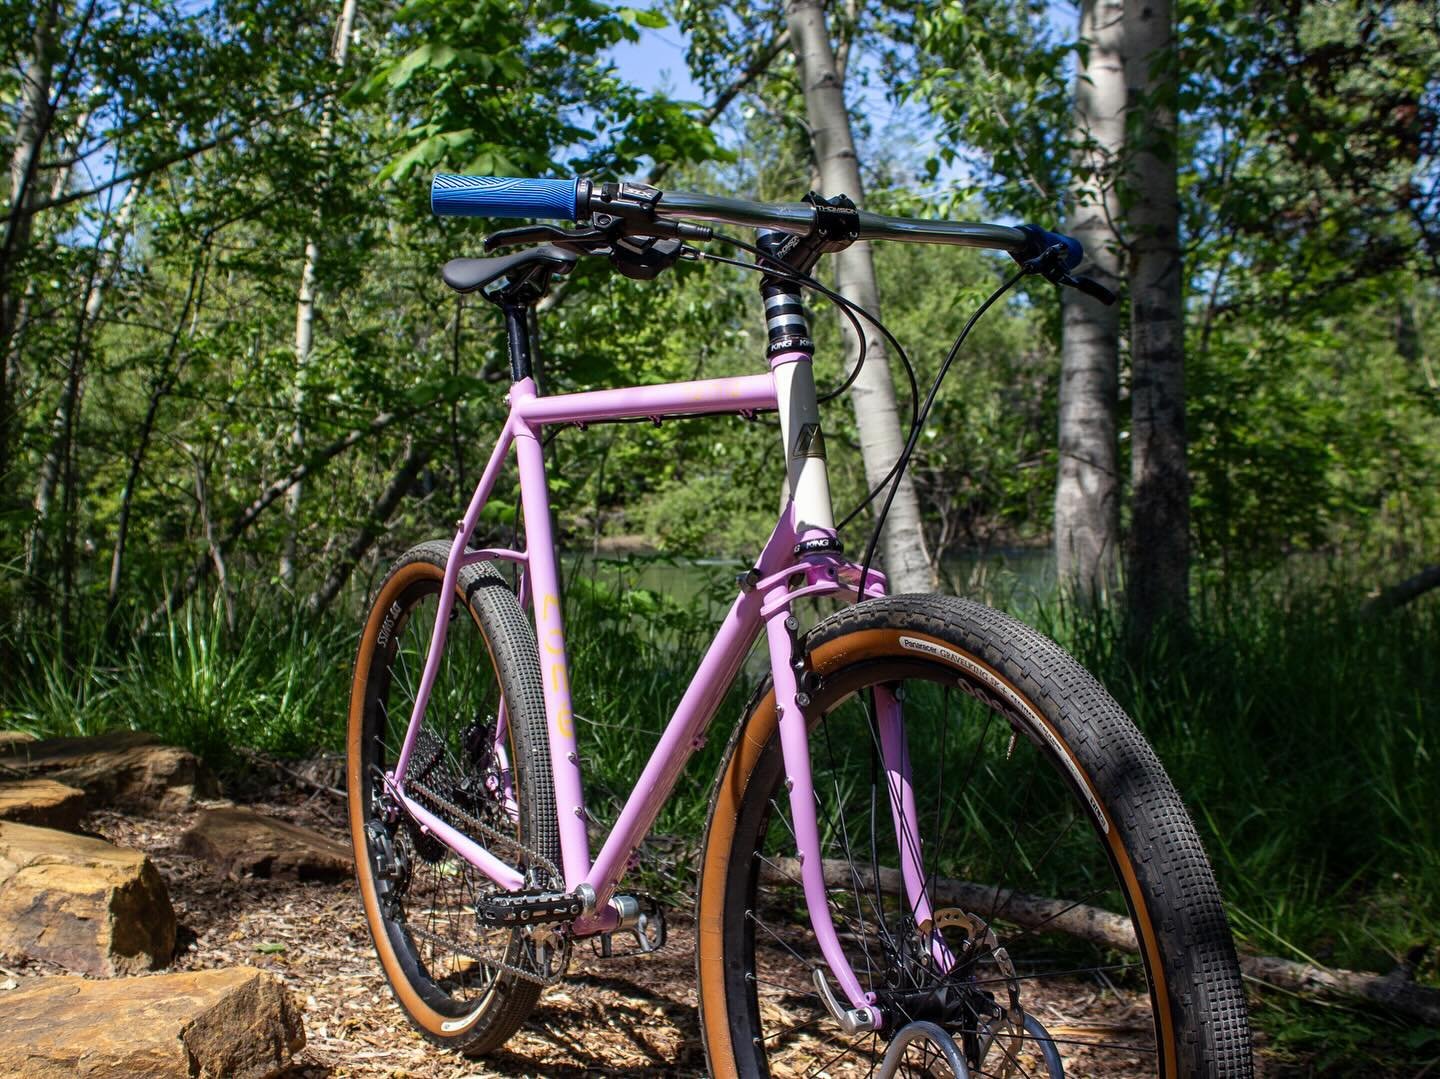 We&rsquo;ve got a VERY unique bike build this week! This sweet mauve Monē Hachita was donated to BBP as a pre-production model. The Monē Hachita is envisioned as a bike that is ultra-retro compatible. It can be built with a wide array of recycled par